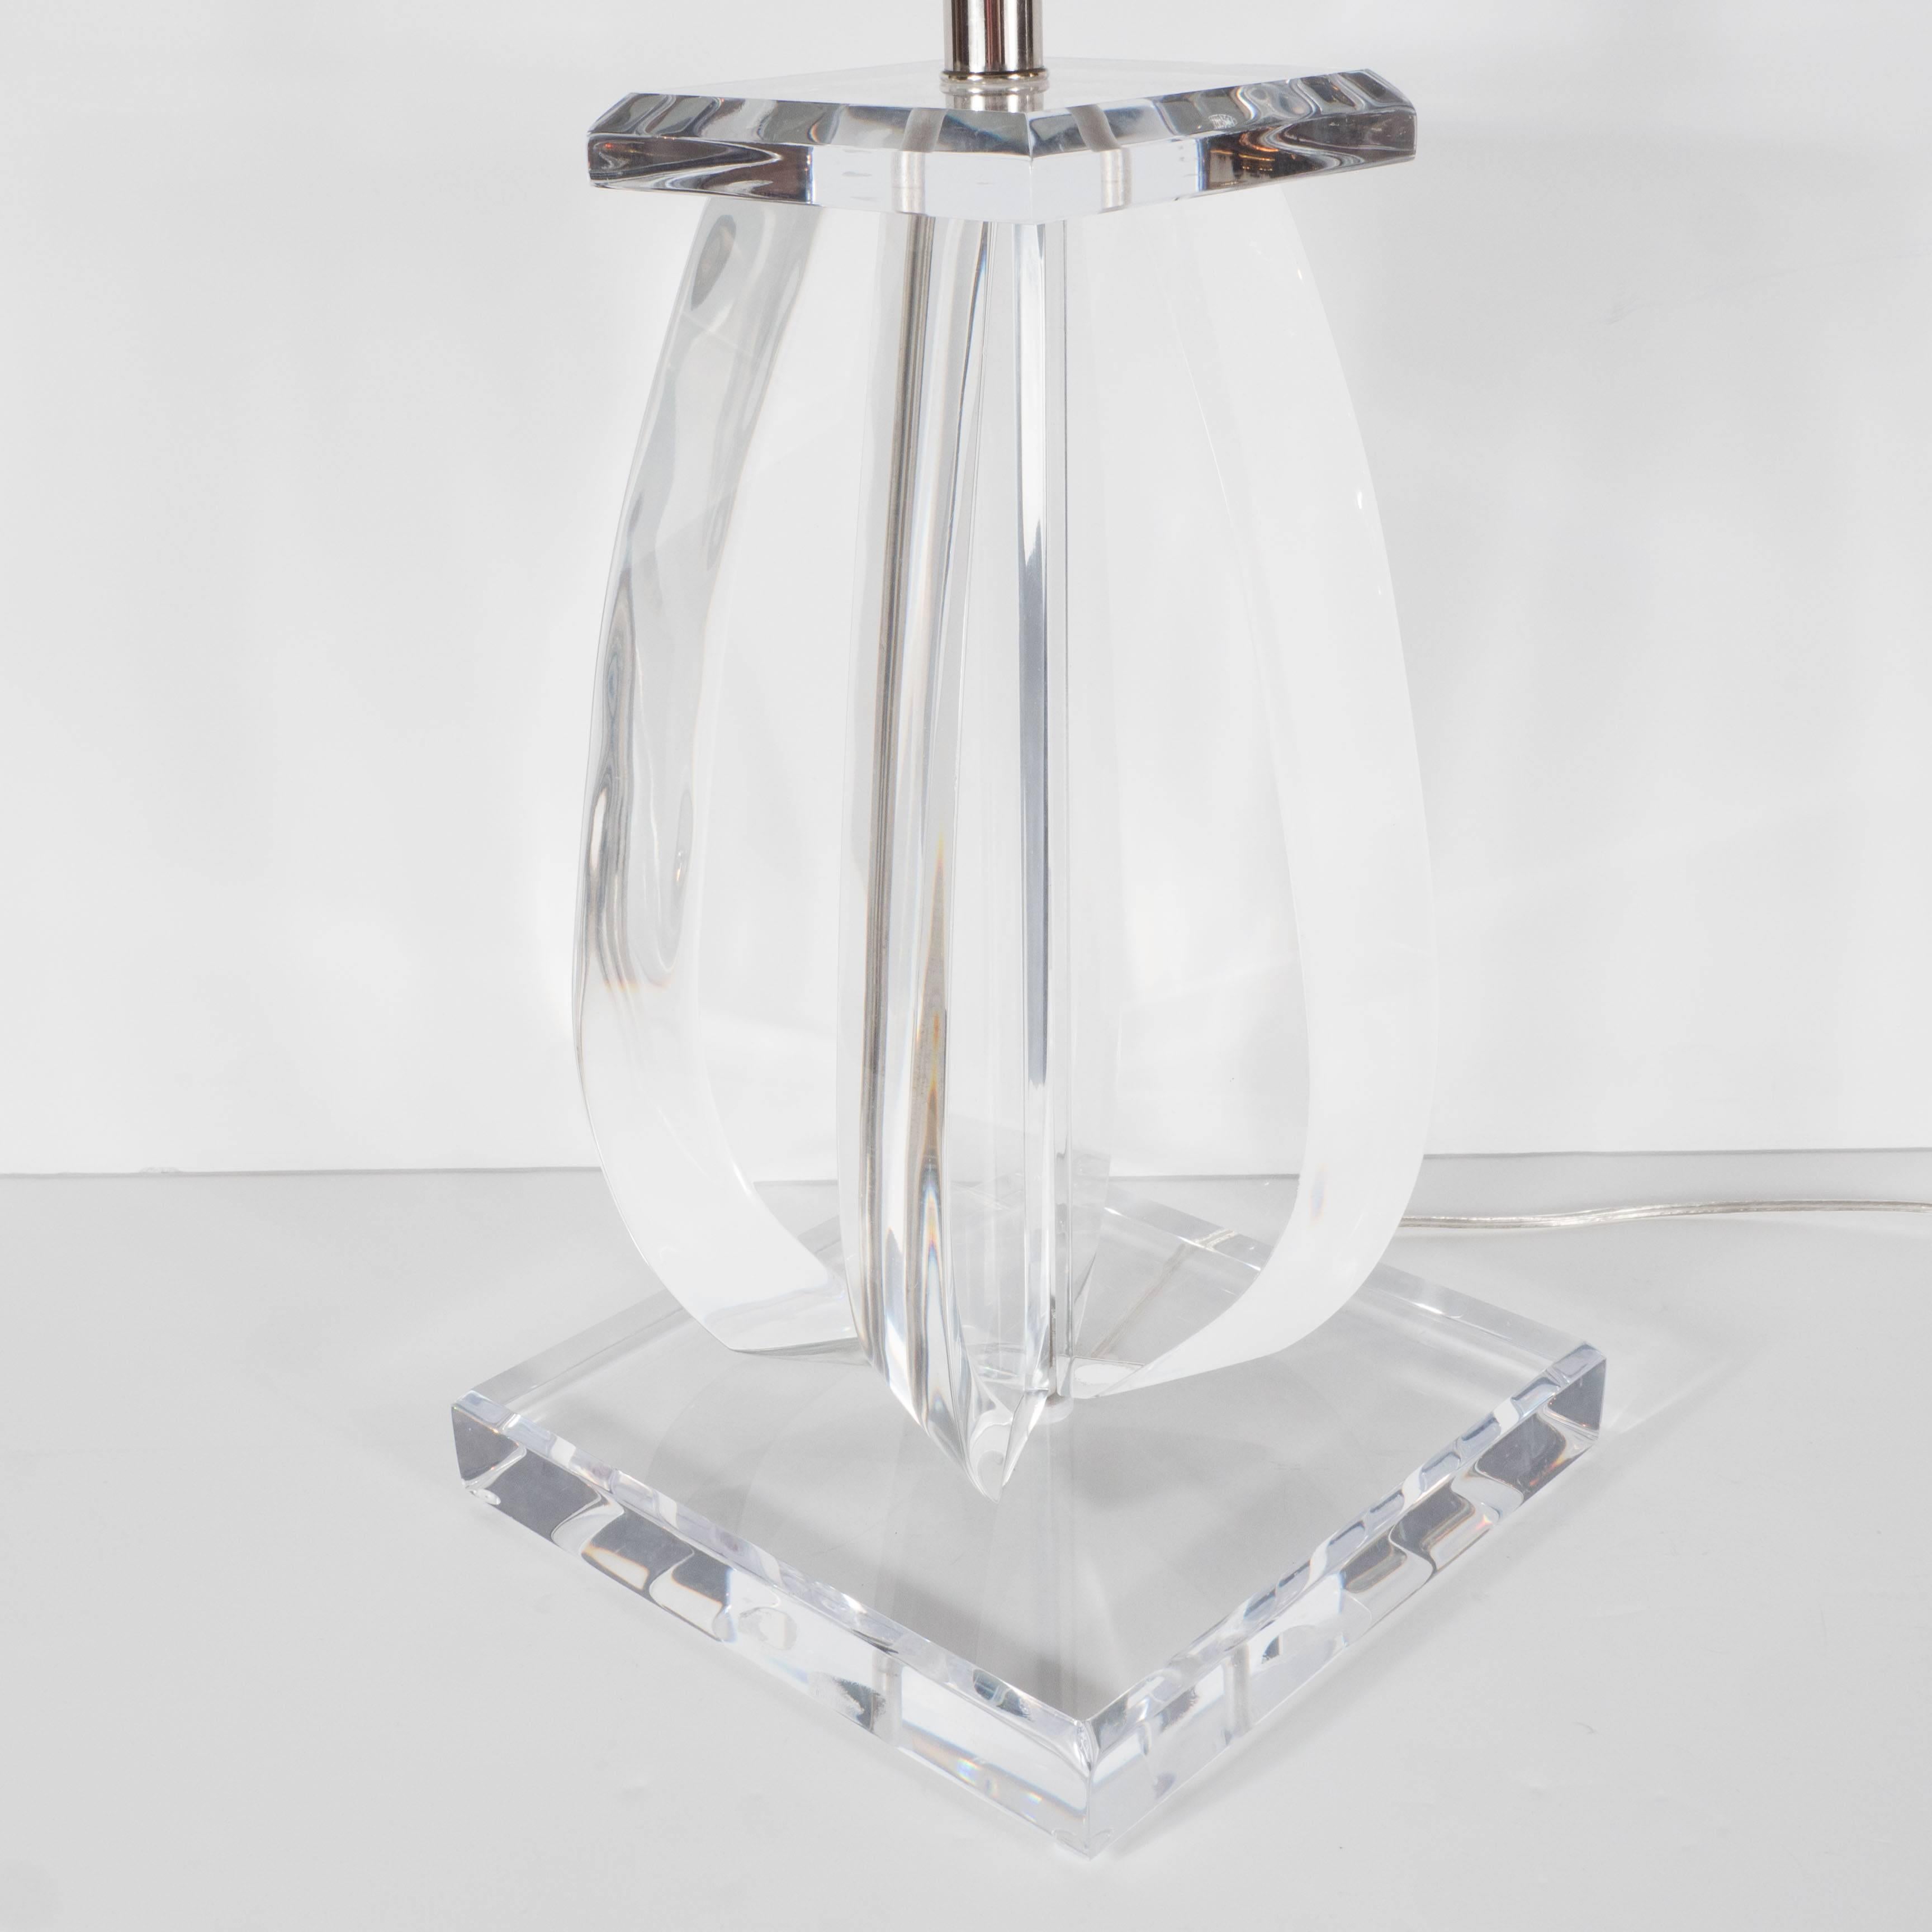 Late 20th Century Mid-Century Modernist Lucite Table Lamp with Chrome Fittings For Sale